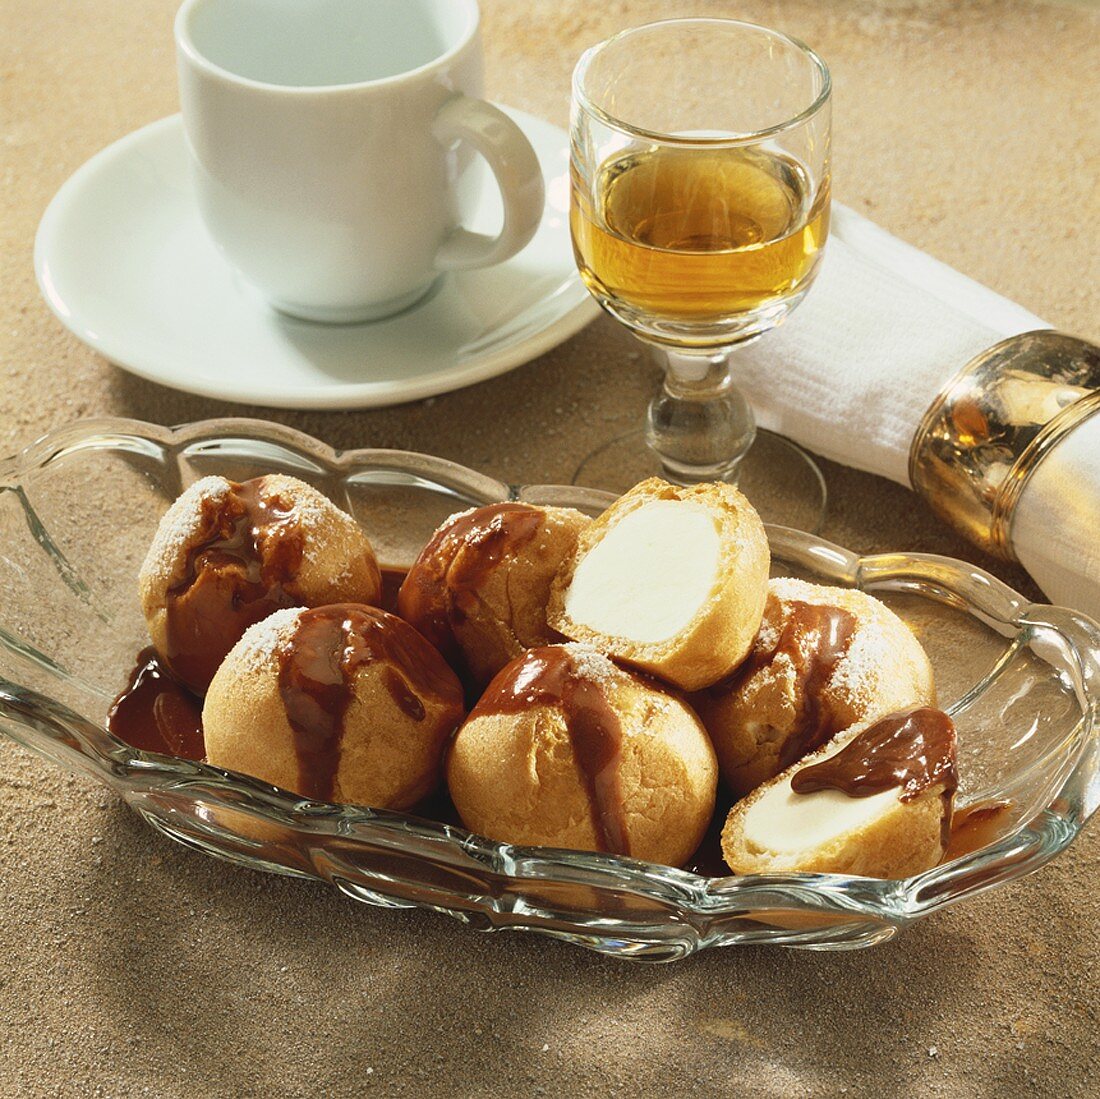 Cream-filled profiteroles with chocolate sauce